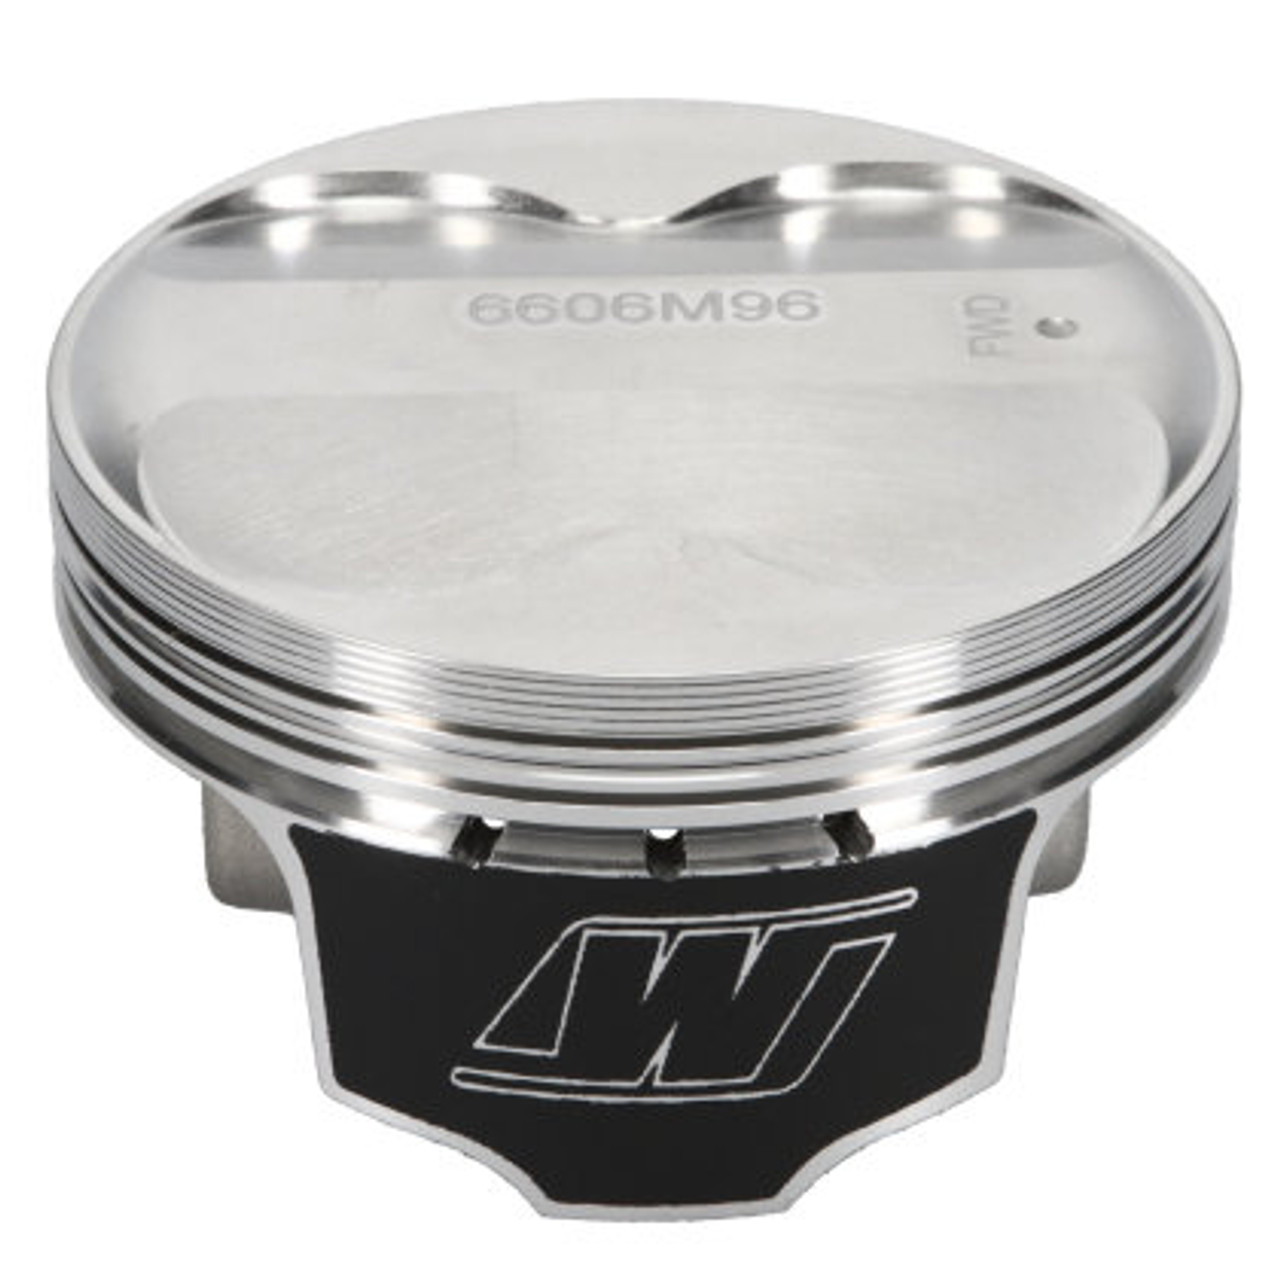 Pro Tru Pistons; Sport Compact Series; Set of 6 Pistons; Recommended RingSet: 9600XX; Rings & Pins Included